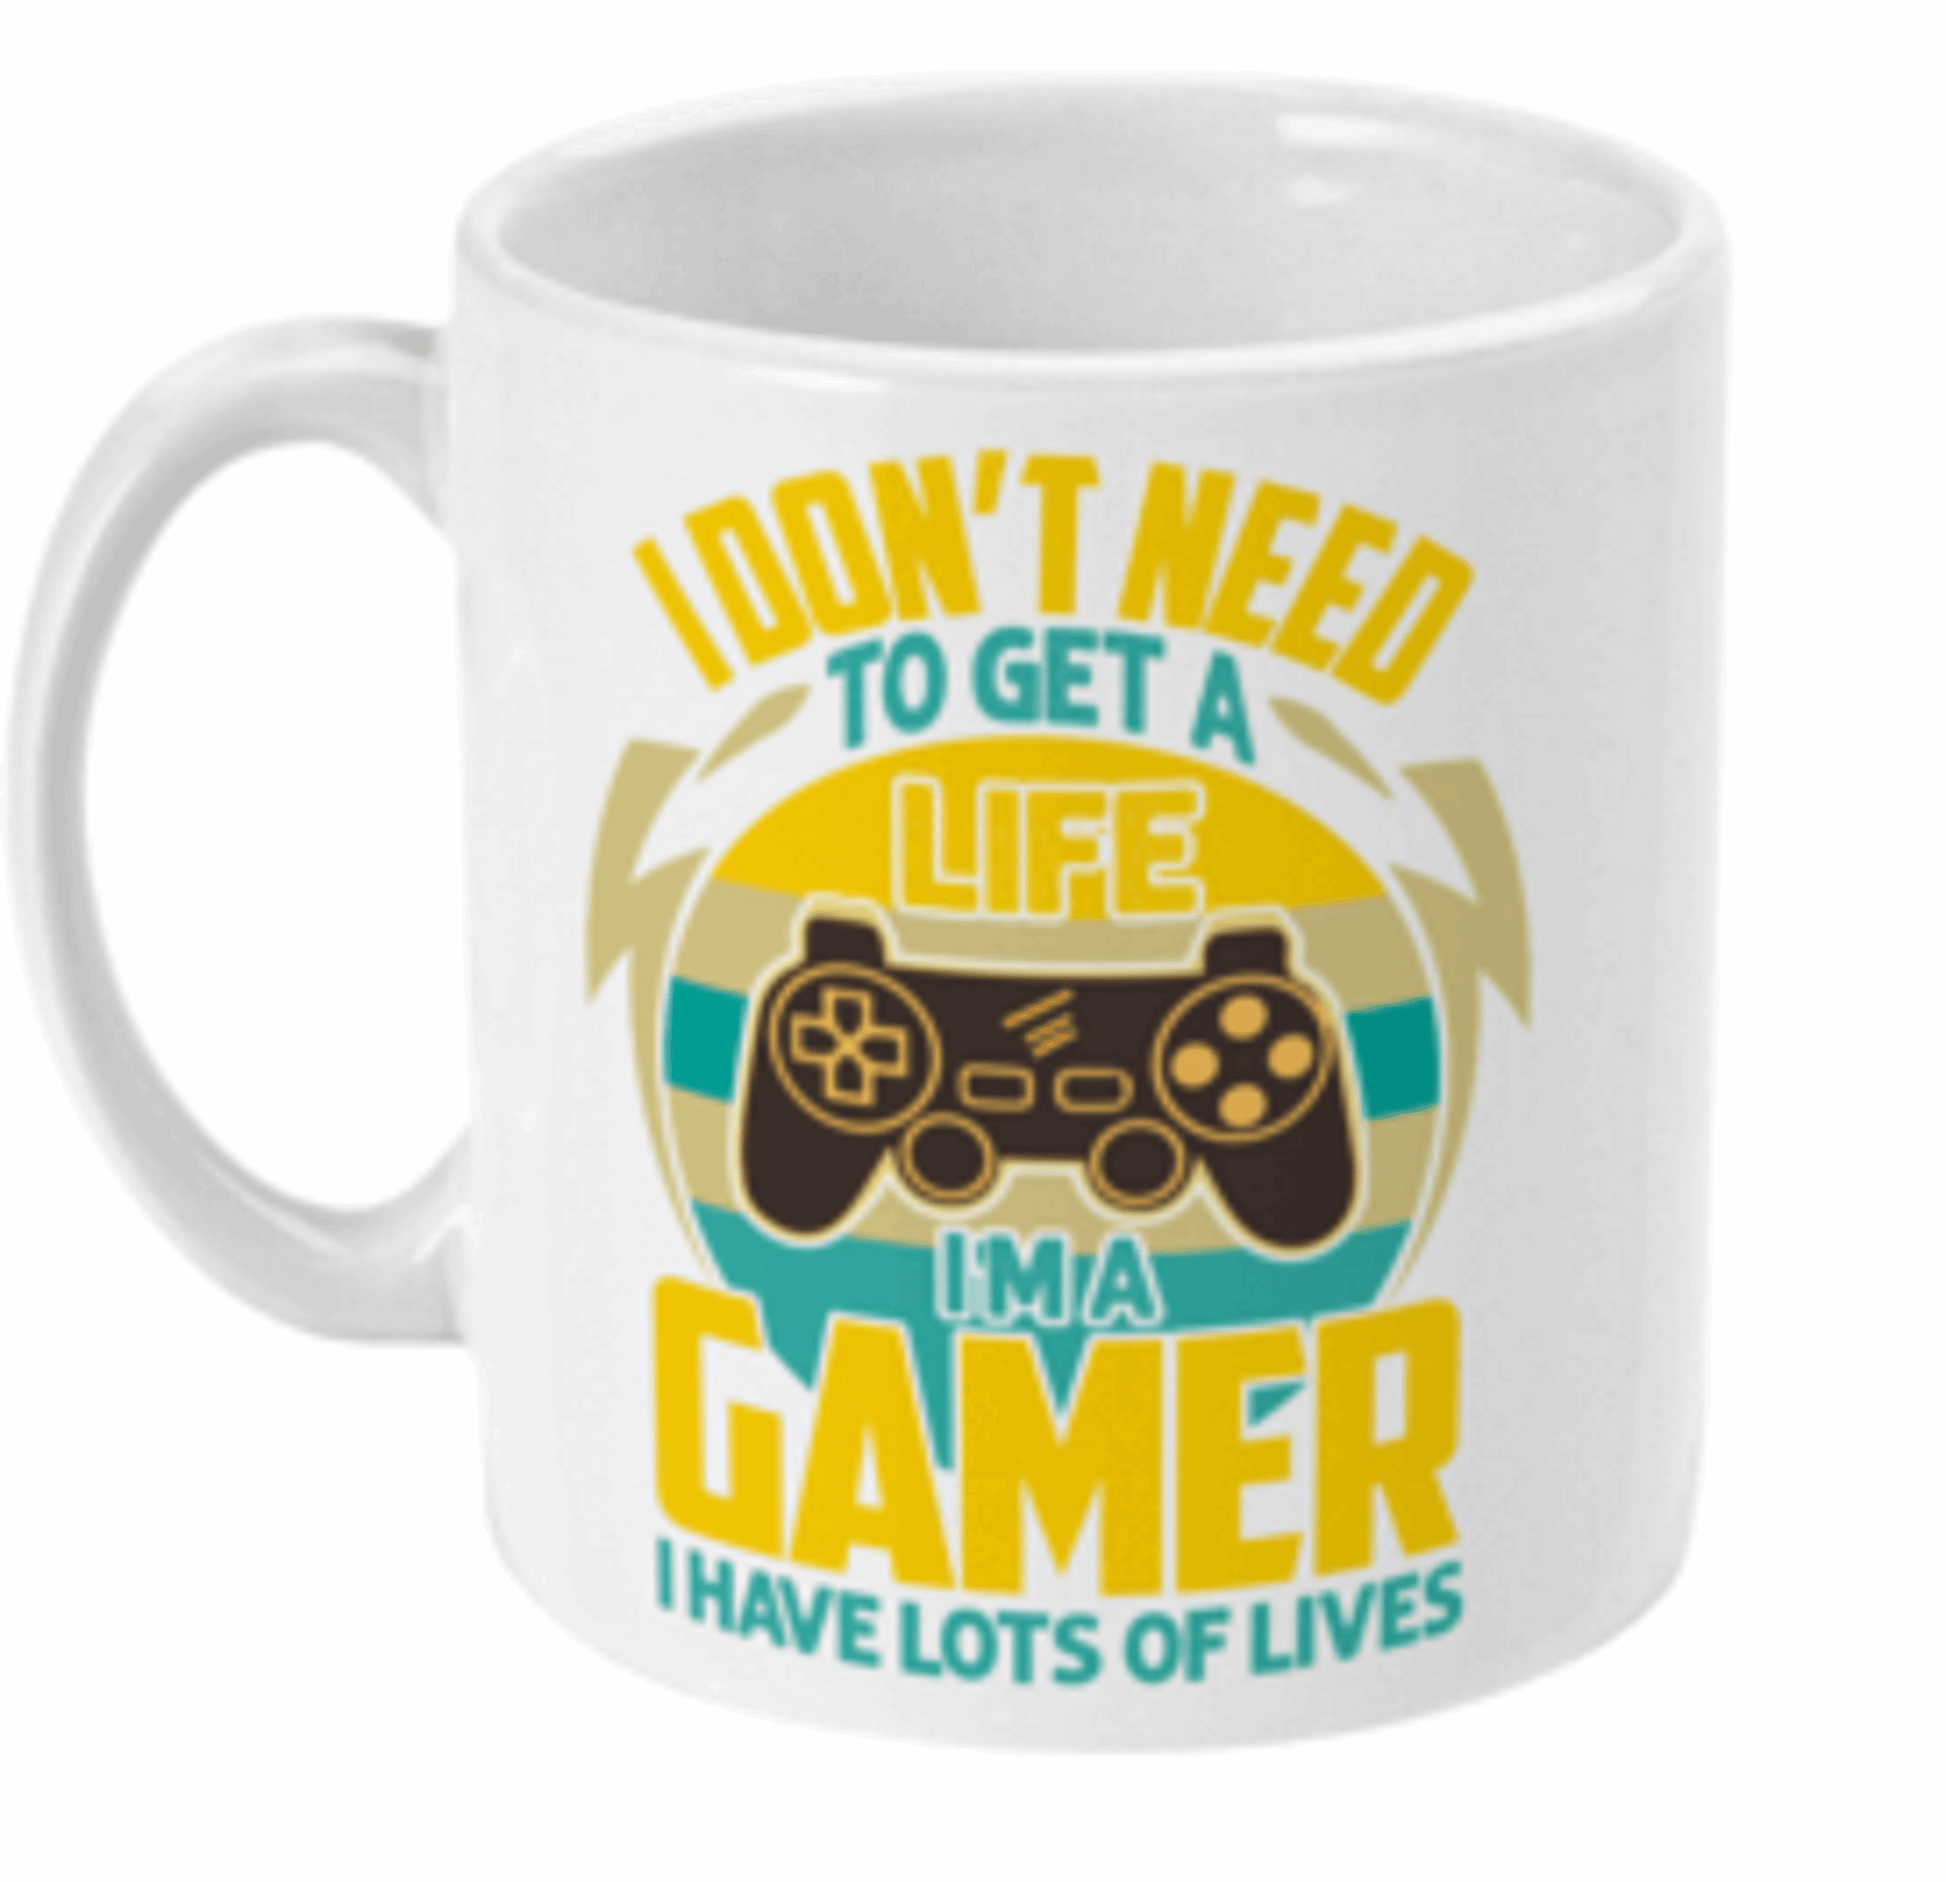  I Don't Need To Get A Life Gamer Coffee Mug by Free Spirit Accessories sold by Free Spirit Accessories